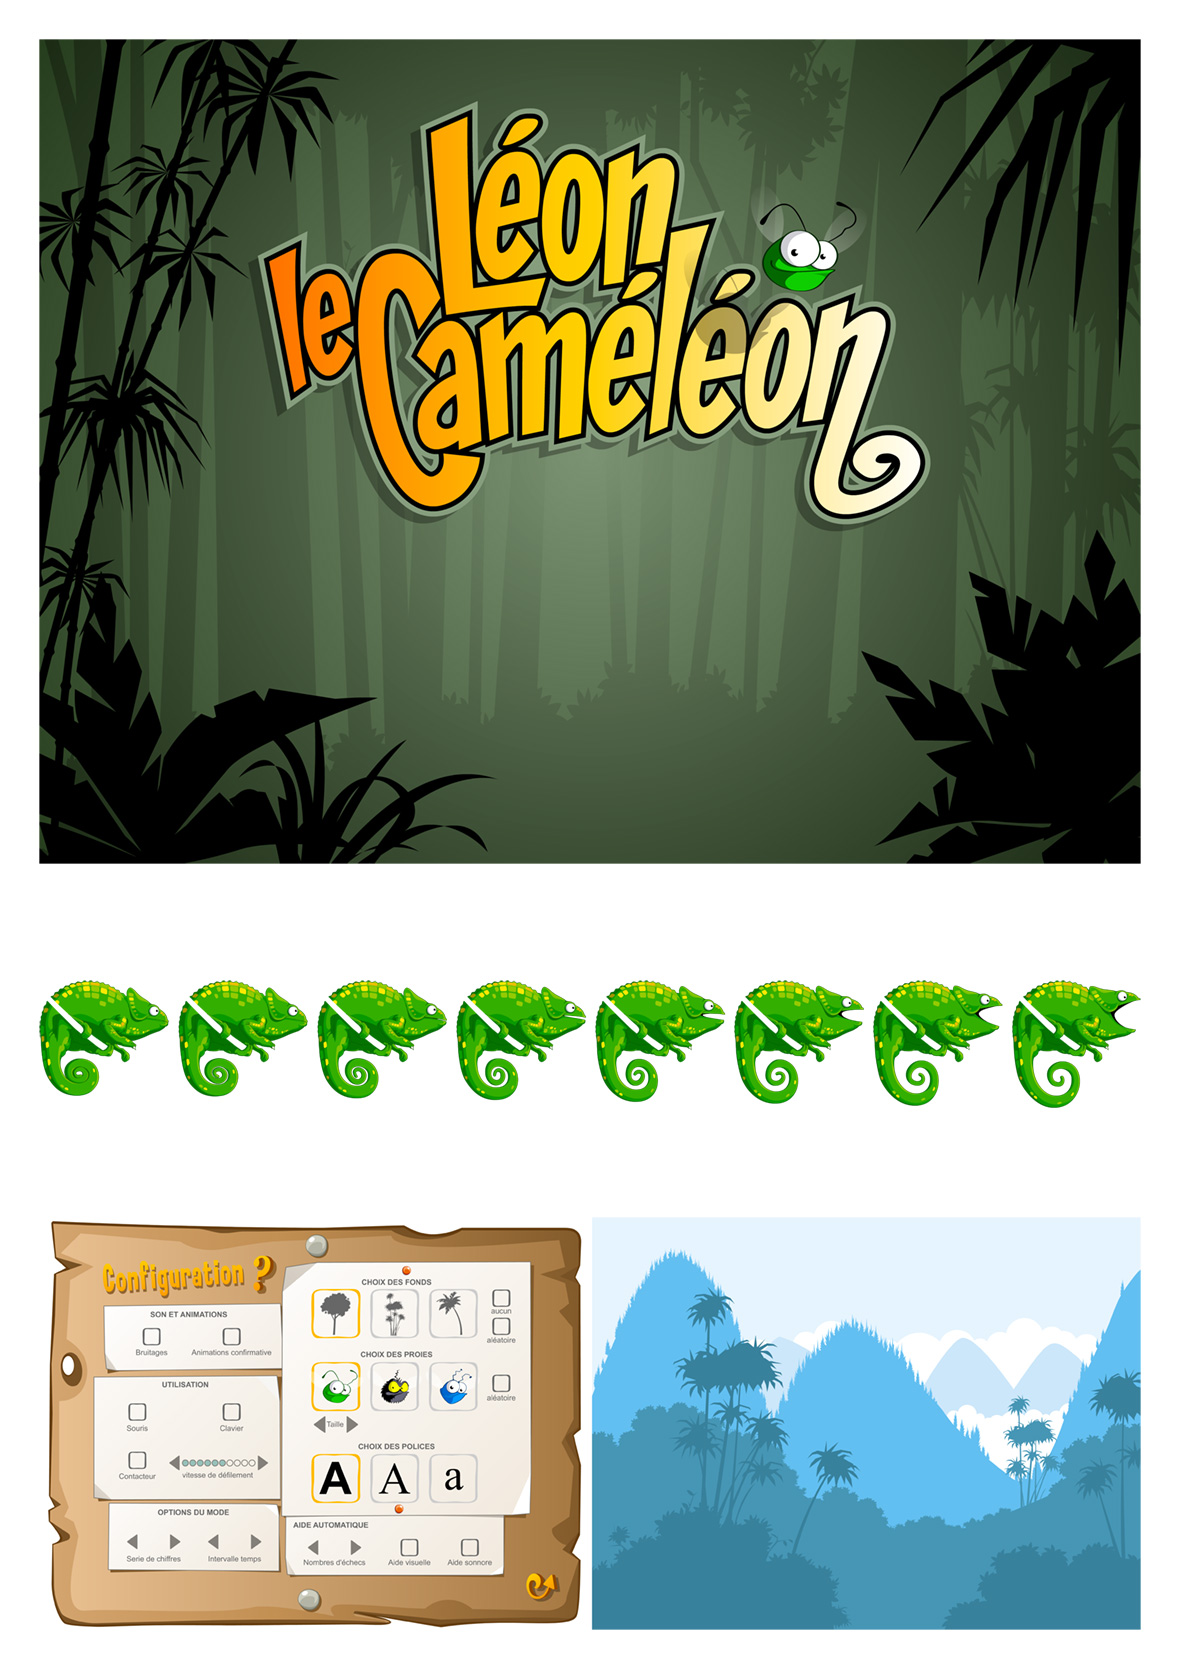 cameleon_page1